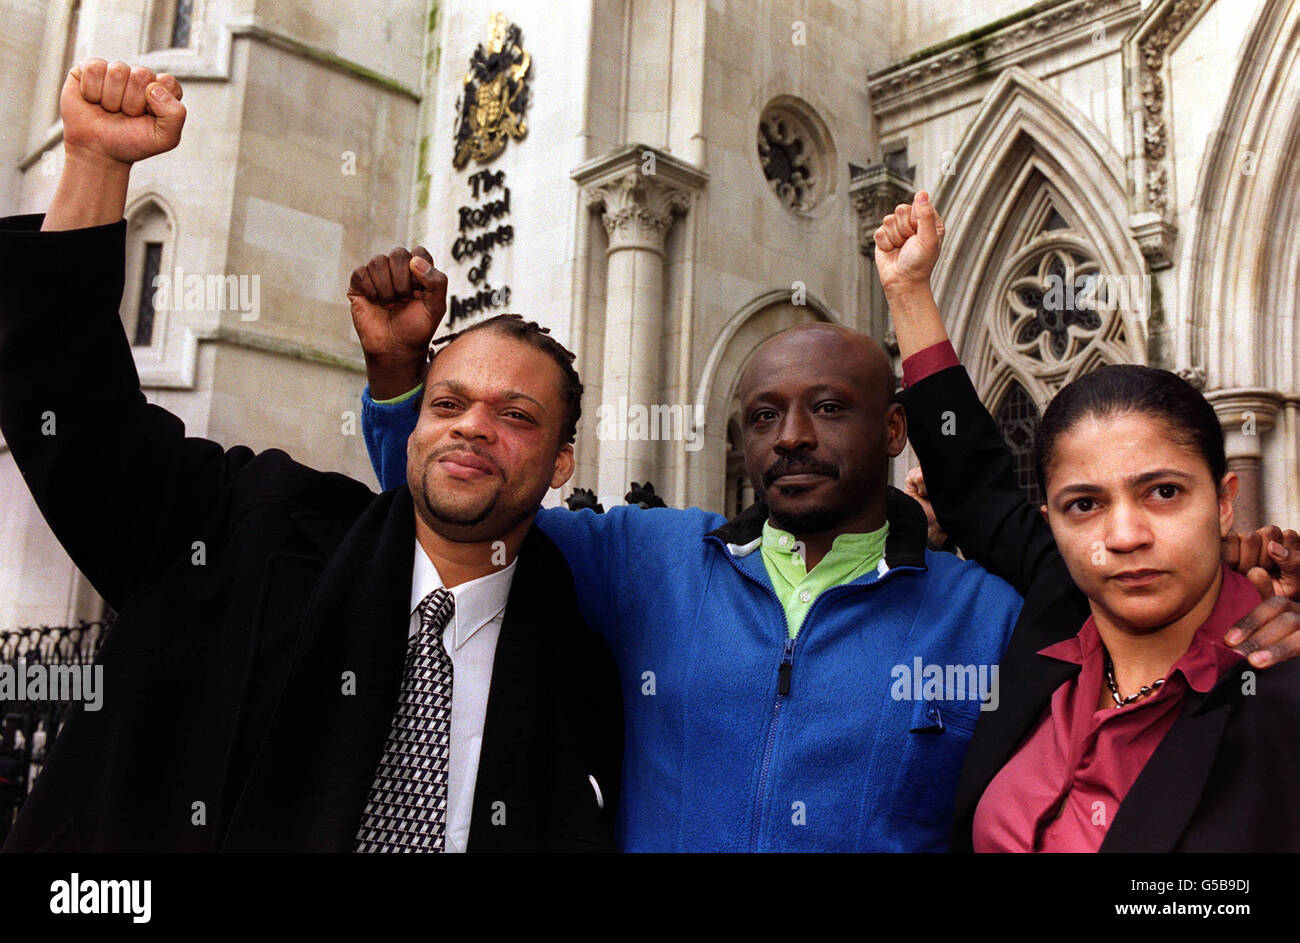 Two members of the family of Christopher Alder, who died in police custody, with a civil rights campaigner outside the High Court in London, after an unsuccessful attempt by five police officers to overturn a jury's verdict of unanimous killing on Mr Alder. * L-R: Ruggie Johnson, Northern Co-ordinator for the National Civil Rights Movement; Richard Alder, Christopher's brother and Tracy Alder, Christopher's cousin. Mr Alder, 37, a former paratrooper who was decorated for his service in Northern Ireland, was left dying on a police station floor for a crucial nine minutes before officers on Stock Photo